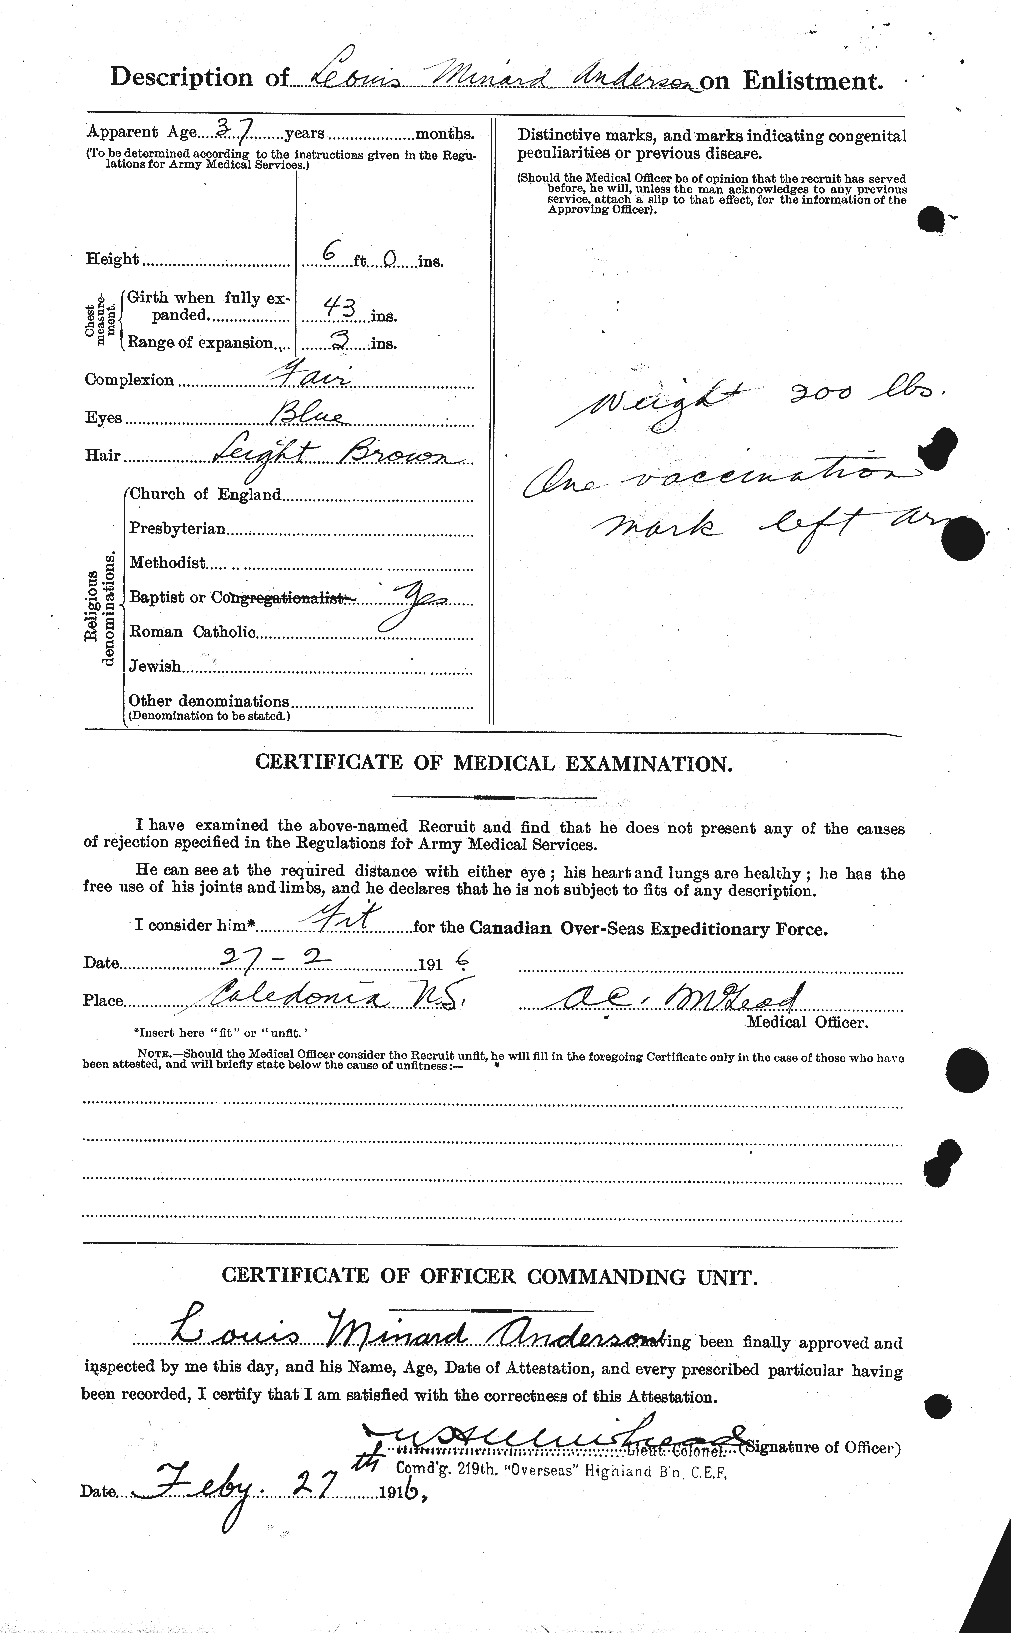 Personnel Records of the First World War - CEF 207518b